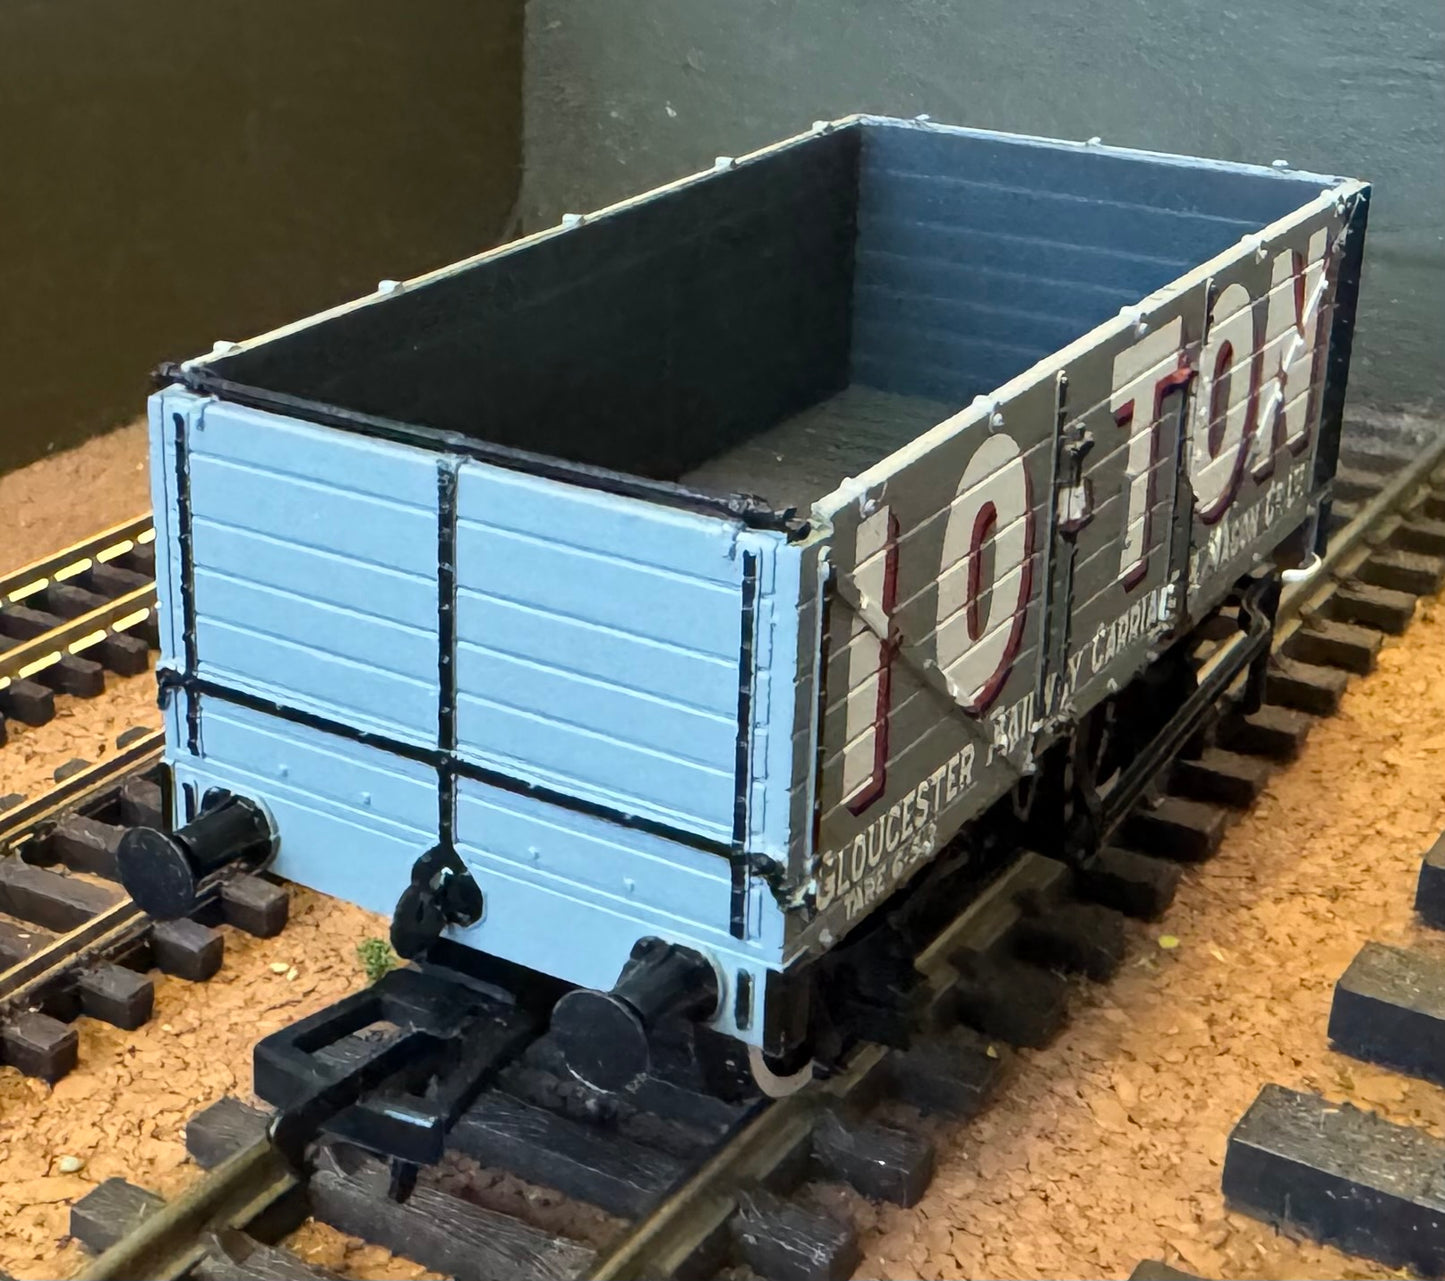 Bachmann (OO) Gloucester Railway Carriage & Wagon Company Ltd, 10-Ton, 7 plank open wagon, in GRC&WC Works Advertising Livery.